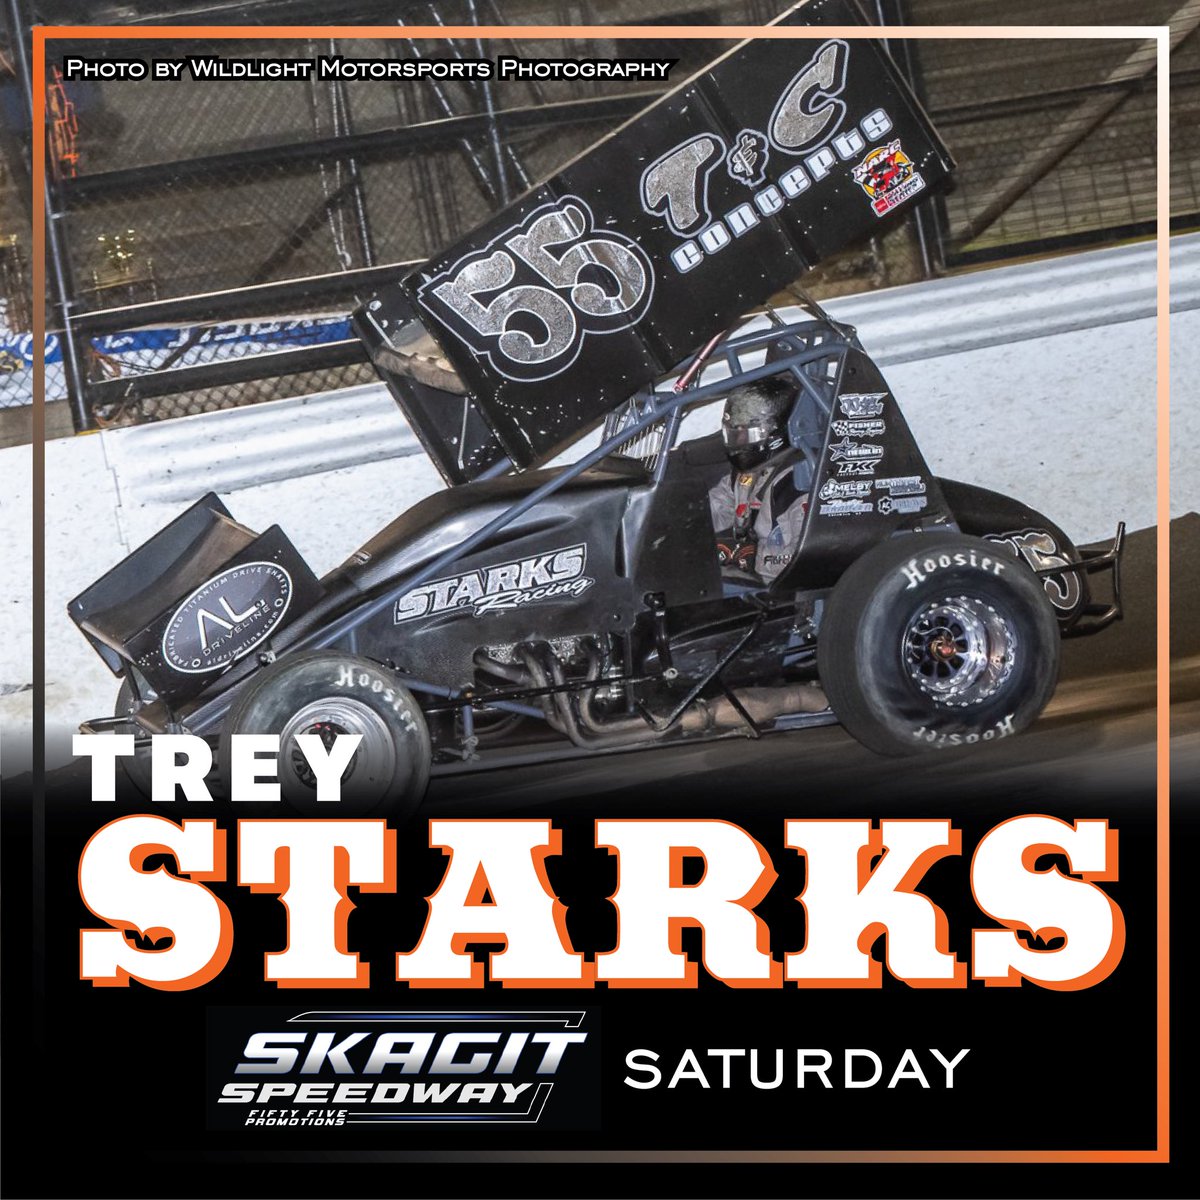 The chase for a third straight @skagitspeedway championship begins this Saturday for @Starks55Trey! #TeamILP